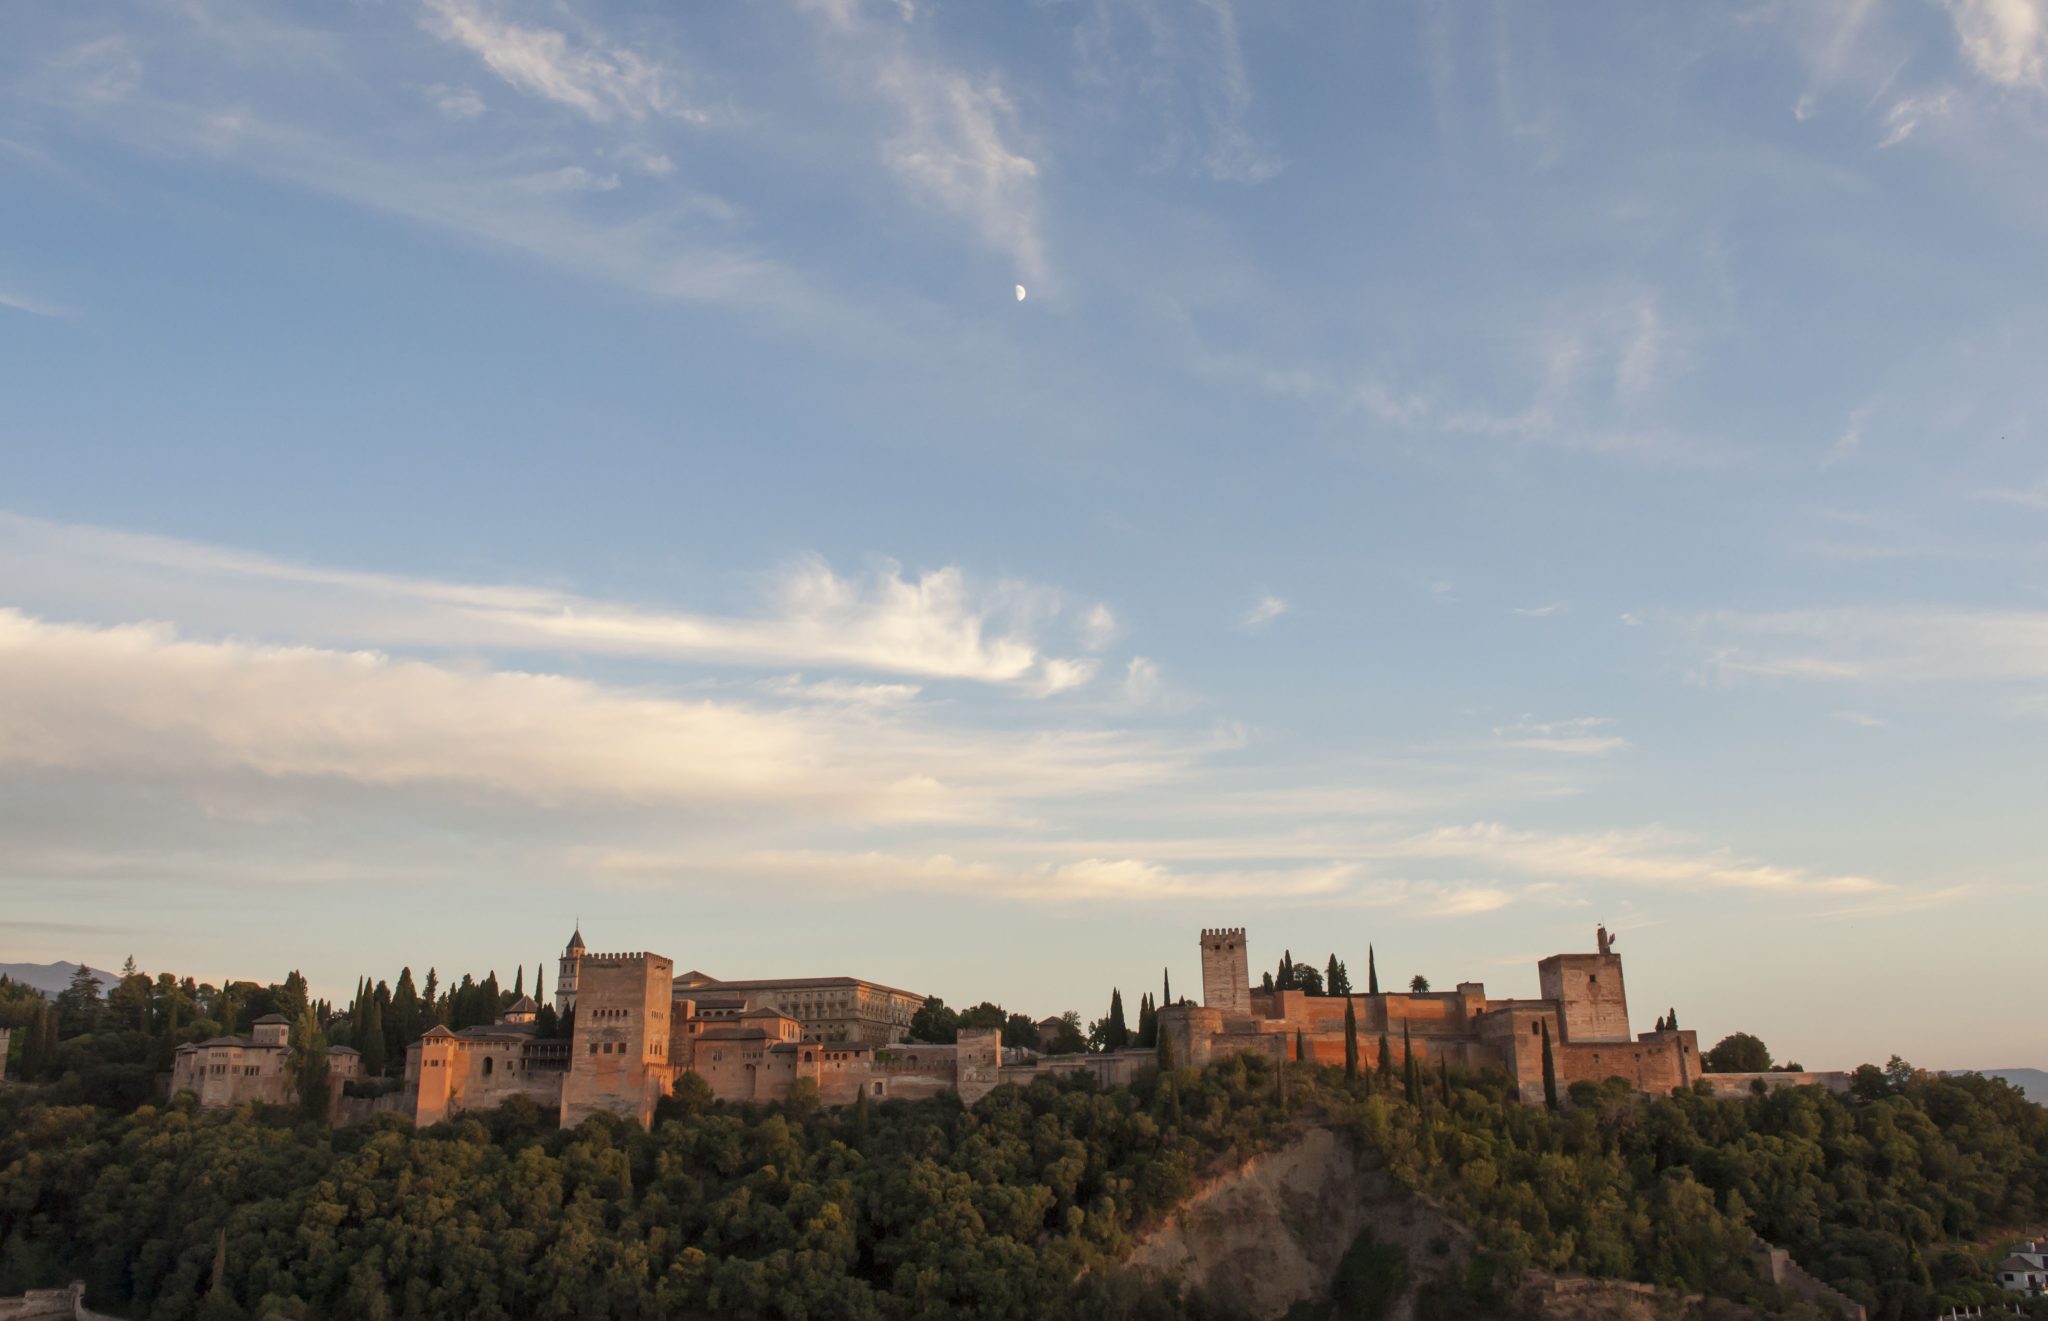 Views of the Alhambra and the Generalife. Granada, Spain – WorldPhotographyDay22